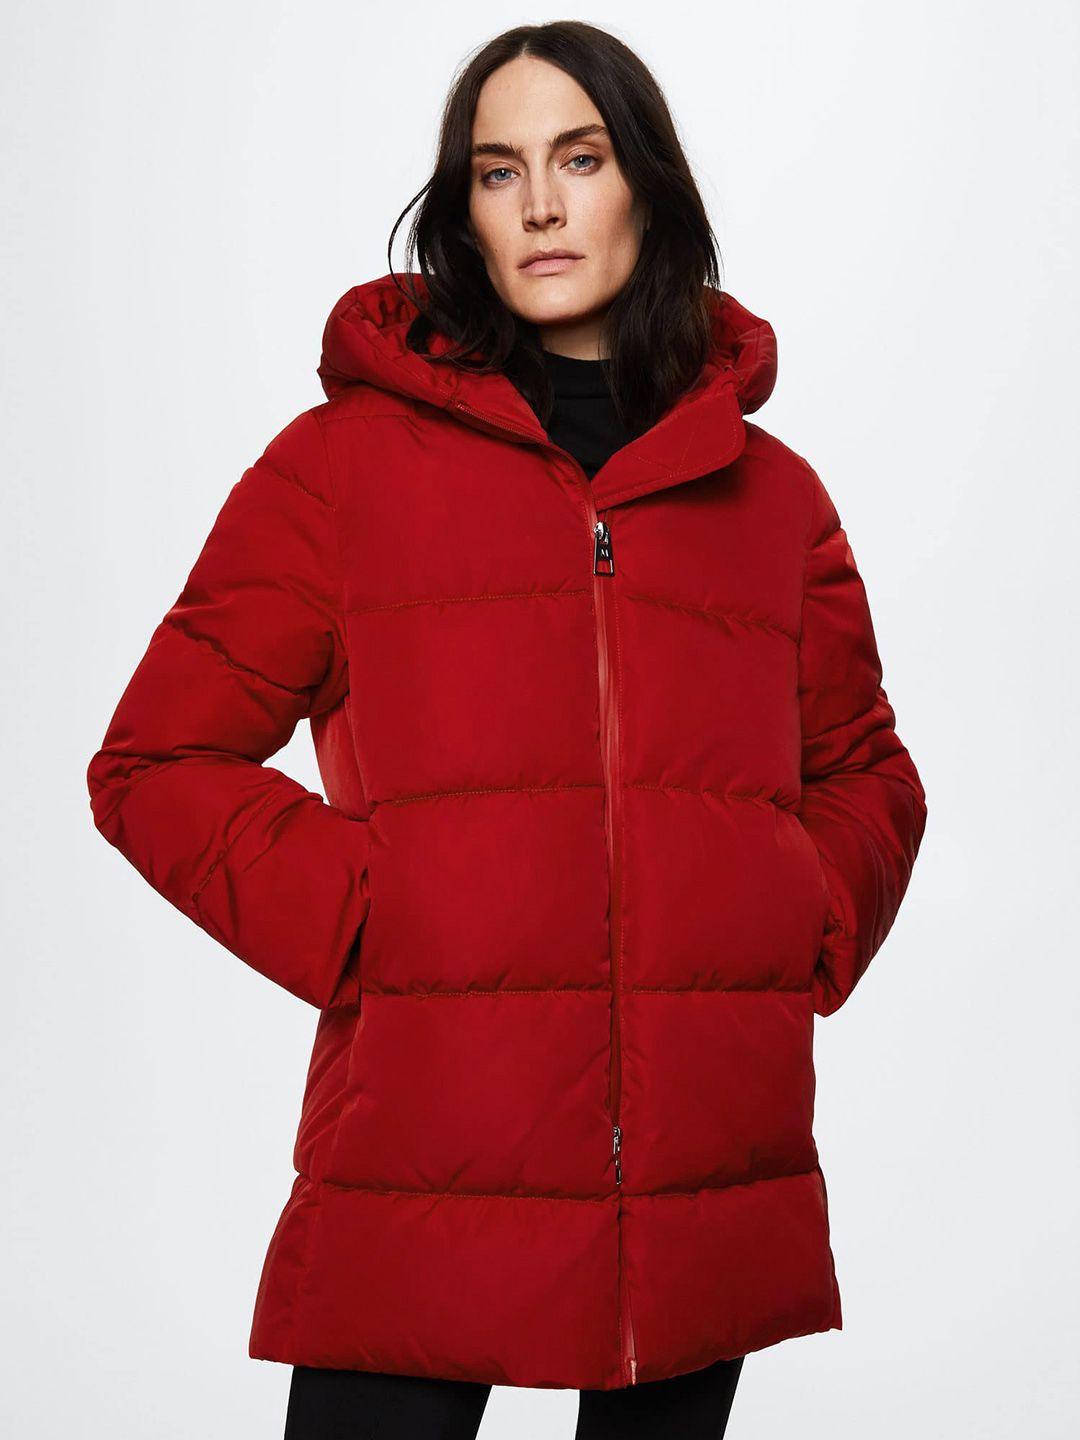 mango-women-red-water-resistant-sustainable-puffer-jacket